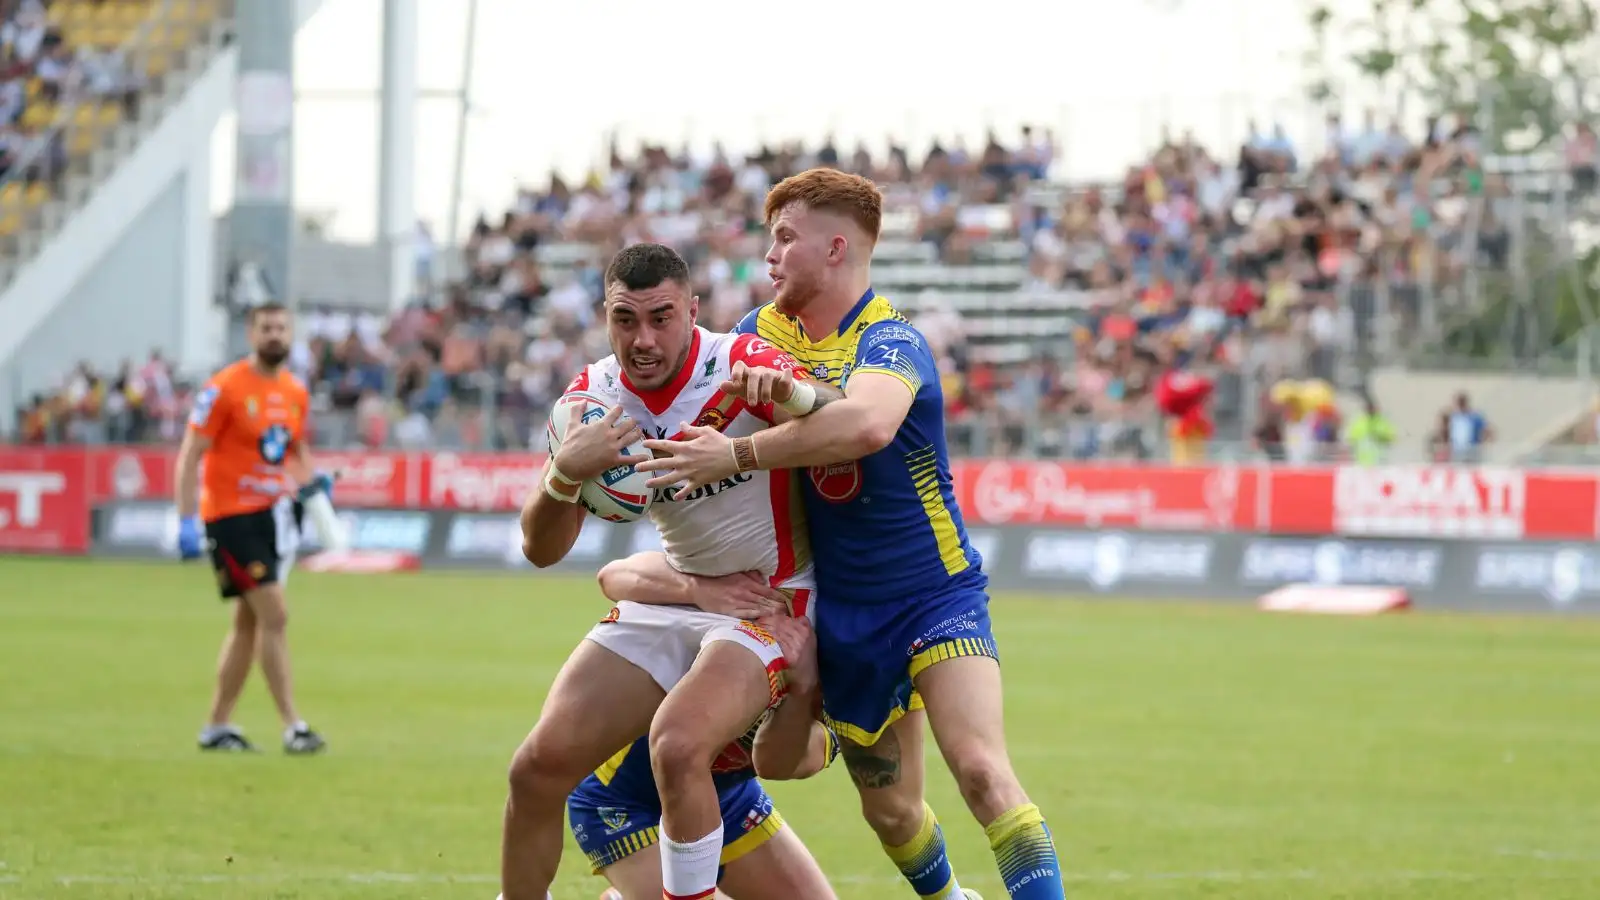 “I’m not 100% sure” – Daryl Powell addresses future of off-contract Warrington forward